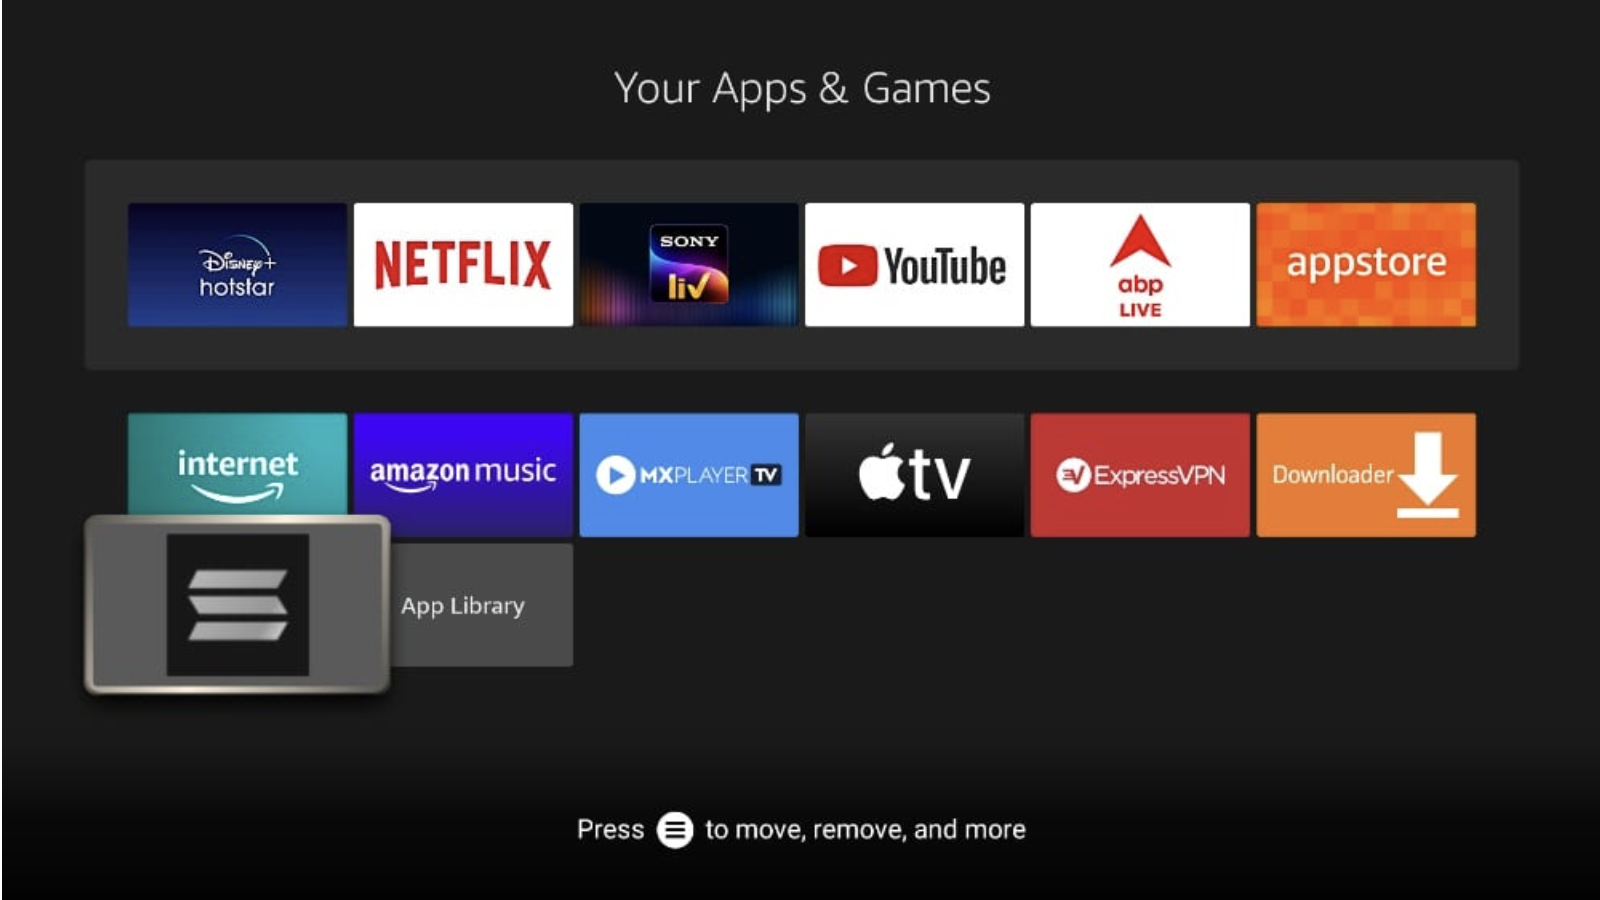 How to Access SS IPTV on FireStick